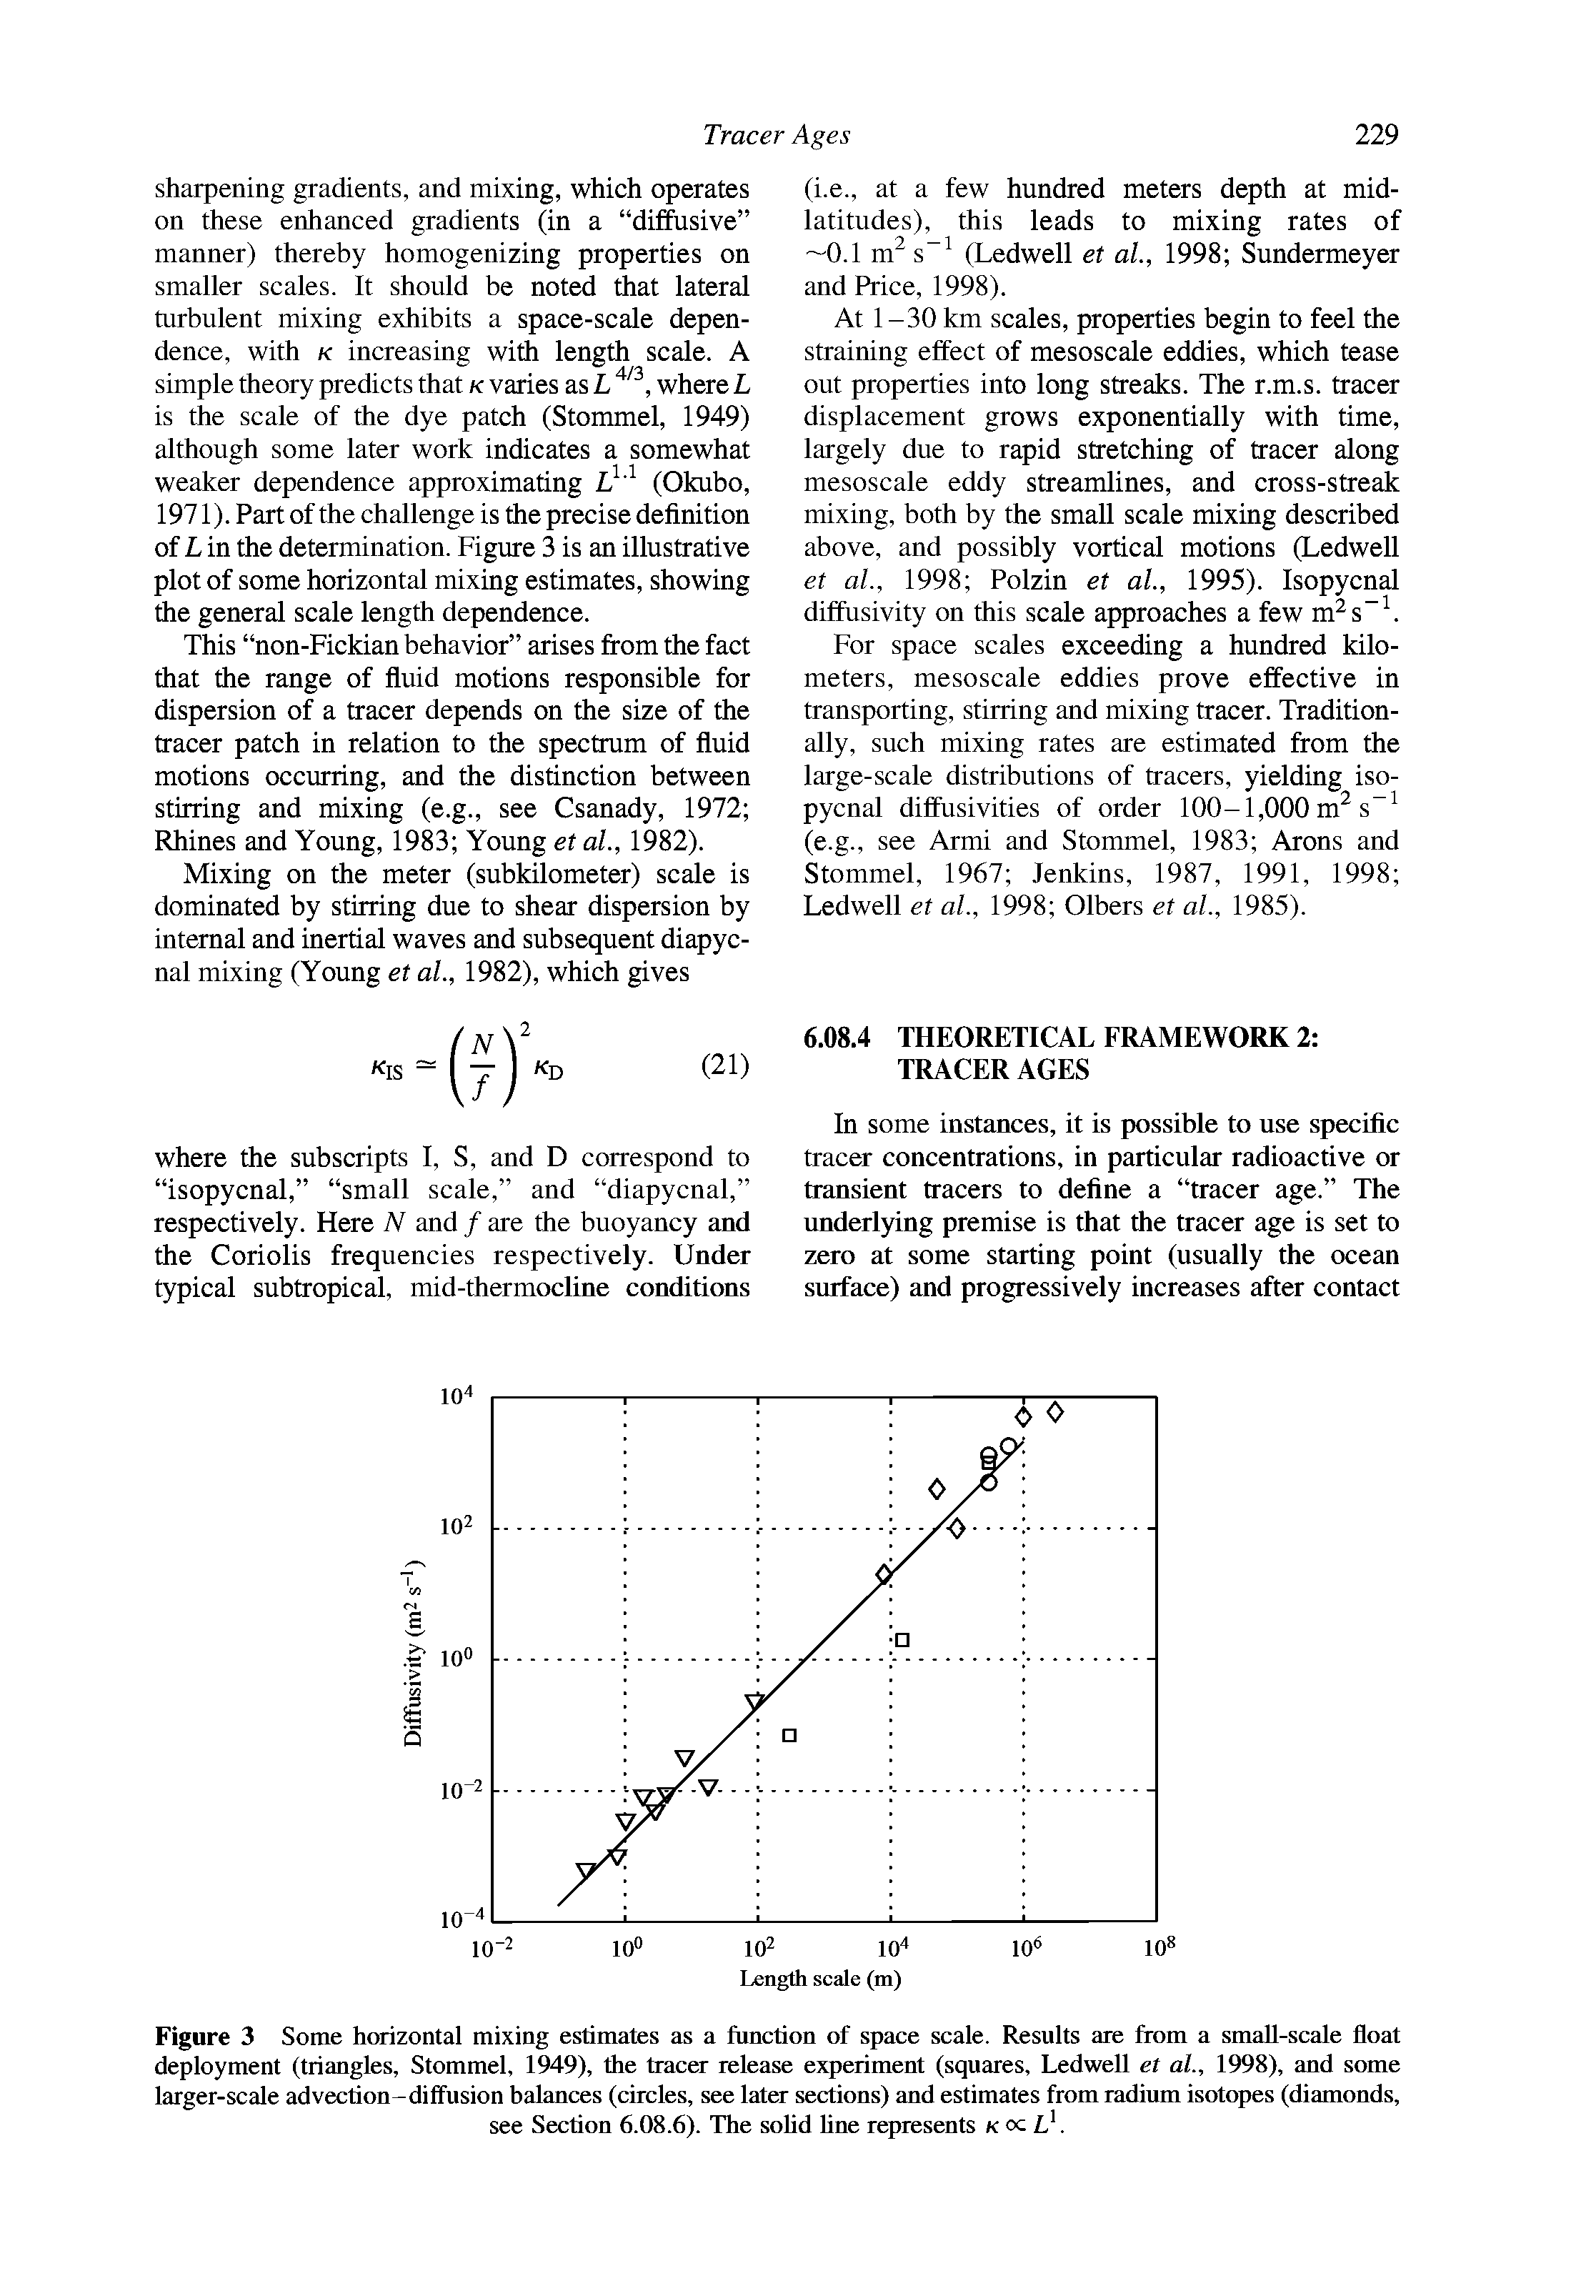 Figure 3 Some horizontal mixing estimates as a function of space scale. Results are from a small-scale float deployment (triangles, Stommel, 1949), the tracer release experiment (squares, Ledwell et al., 1998), and some larger-scale advection-diffusion balances (circles, see later sections) and estimates from radium isotopes (diamonds,...